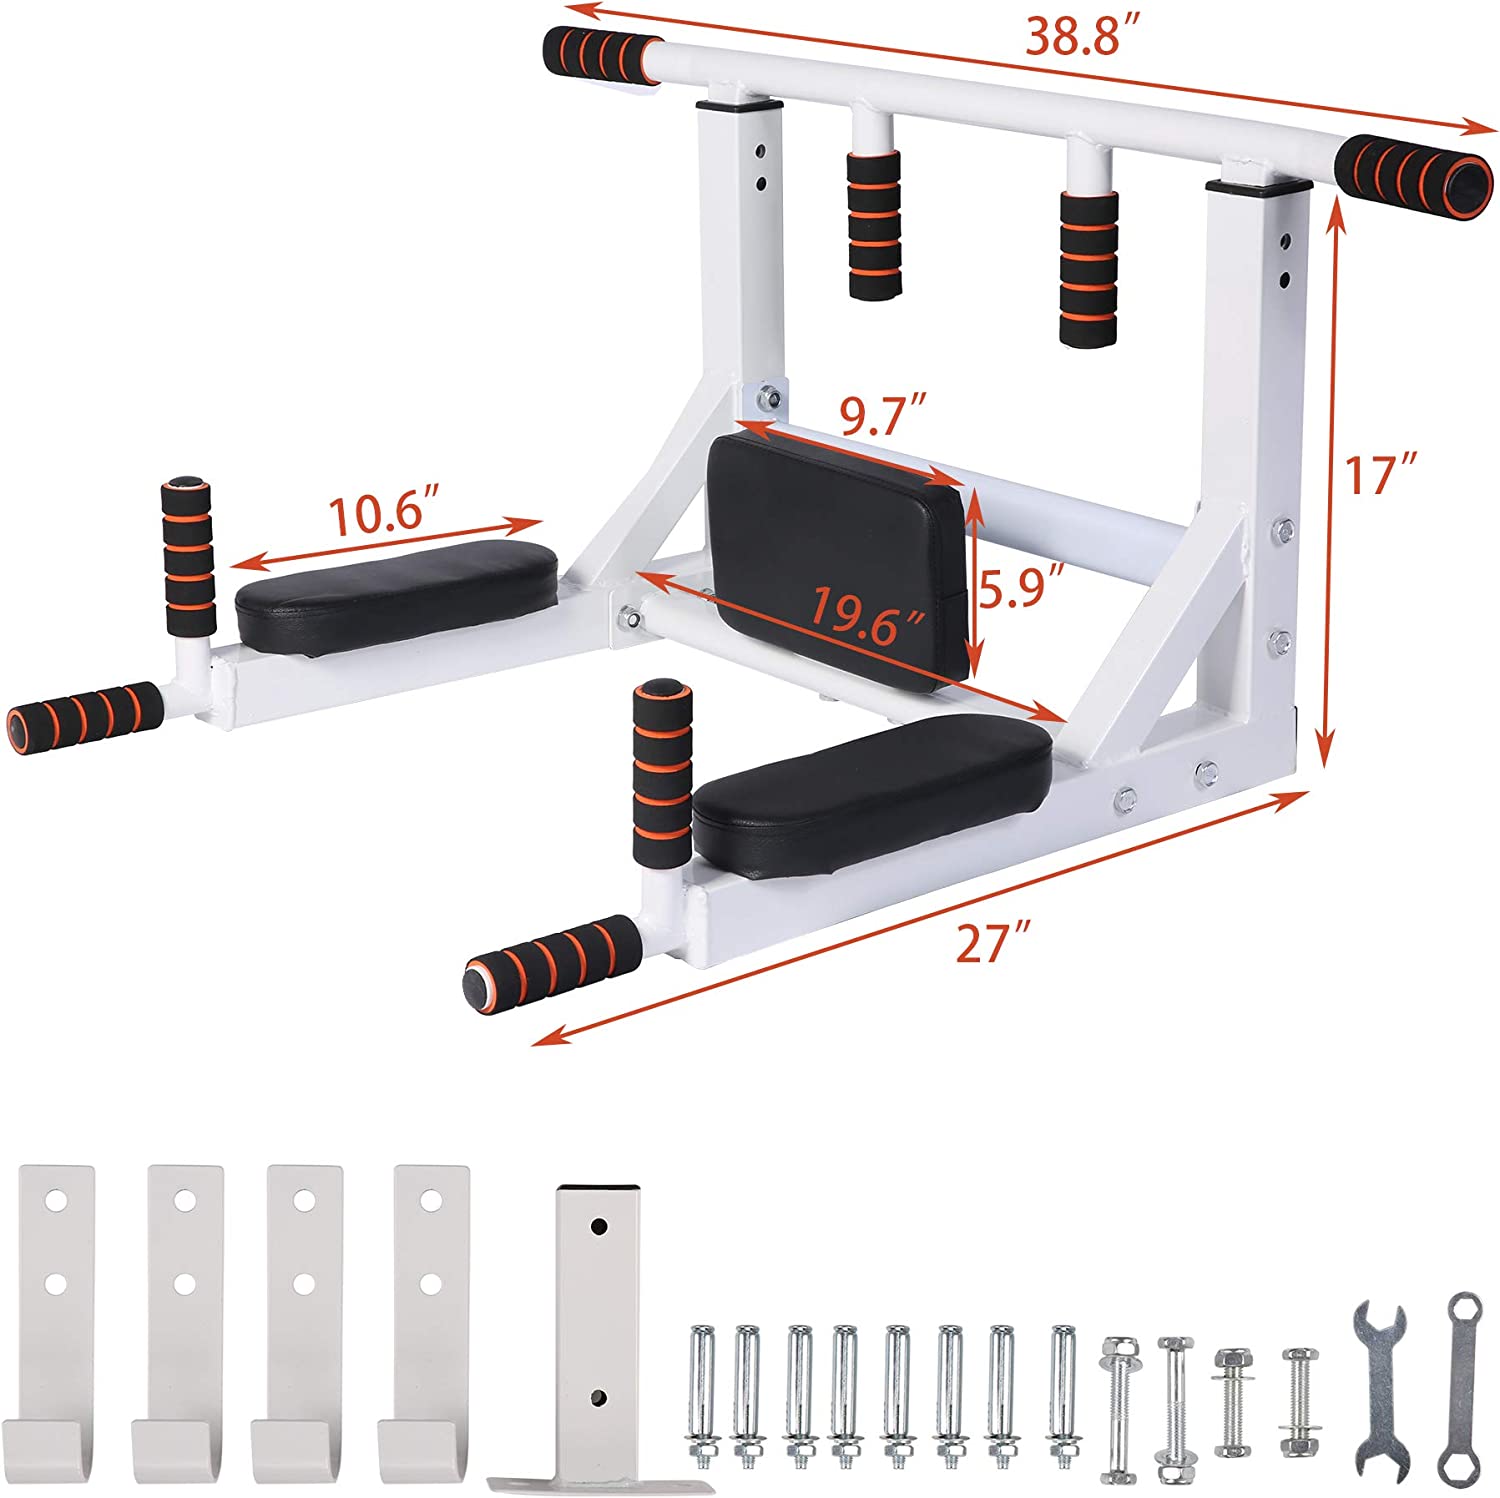 (Out of Stock) Versatile 2-in-1 Wall Mounted Pull Up Bar and Dip Station for Home Gym - Supports up to 330 Lbs